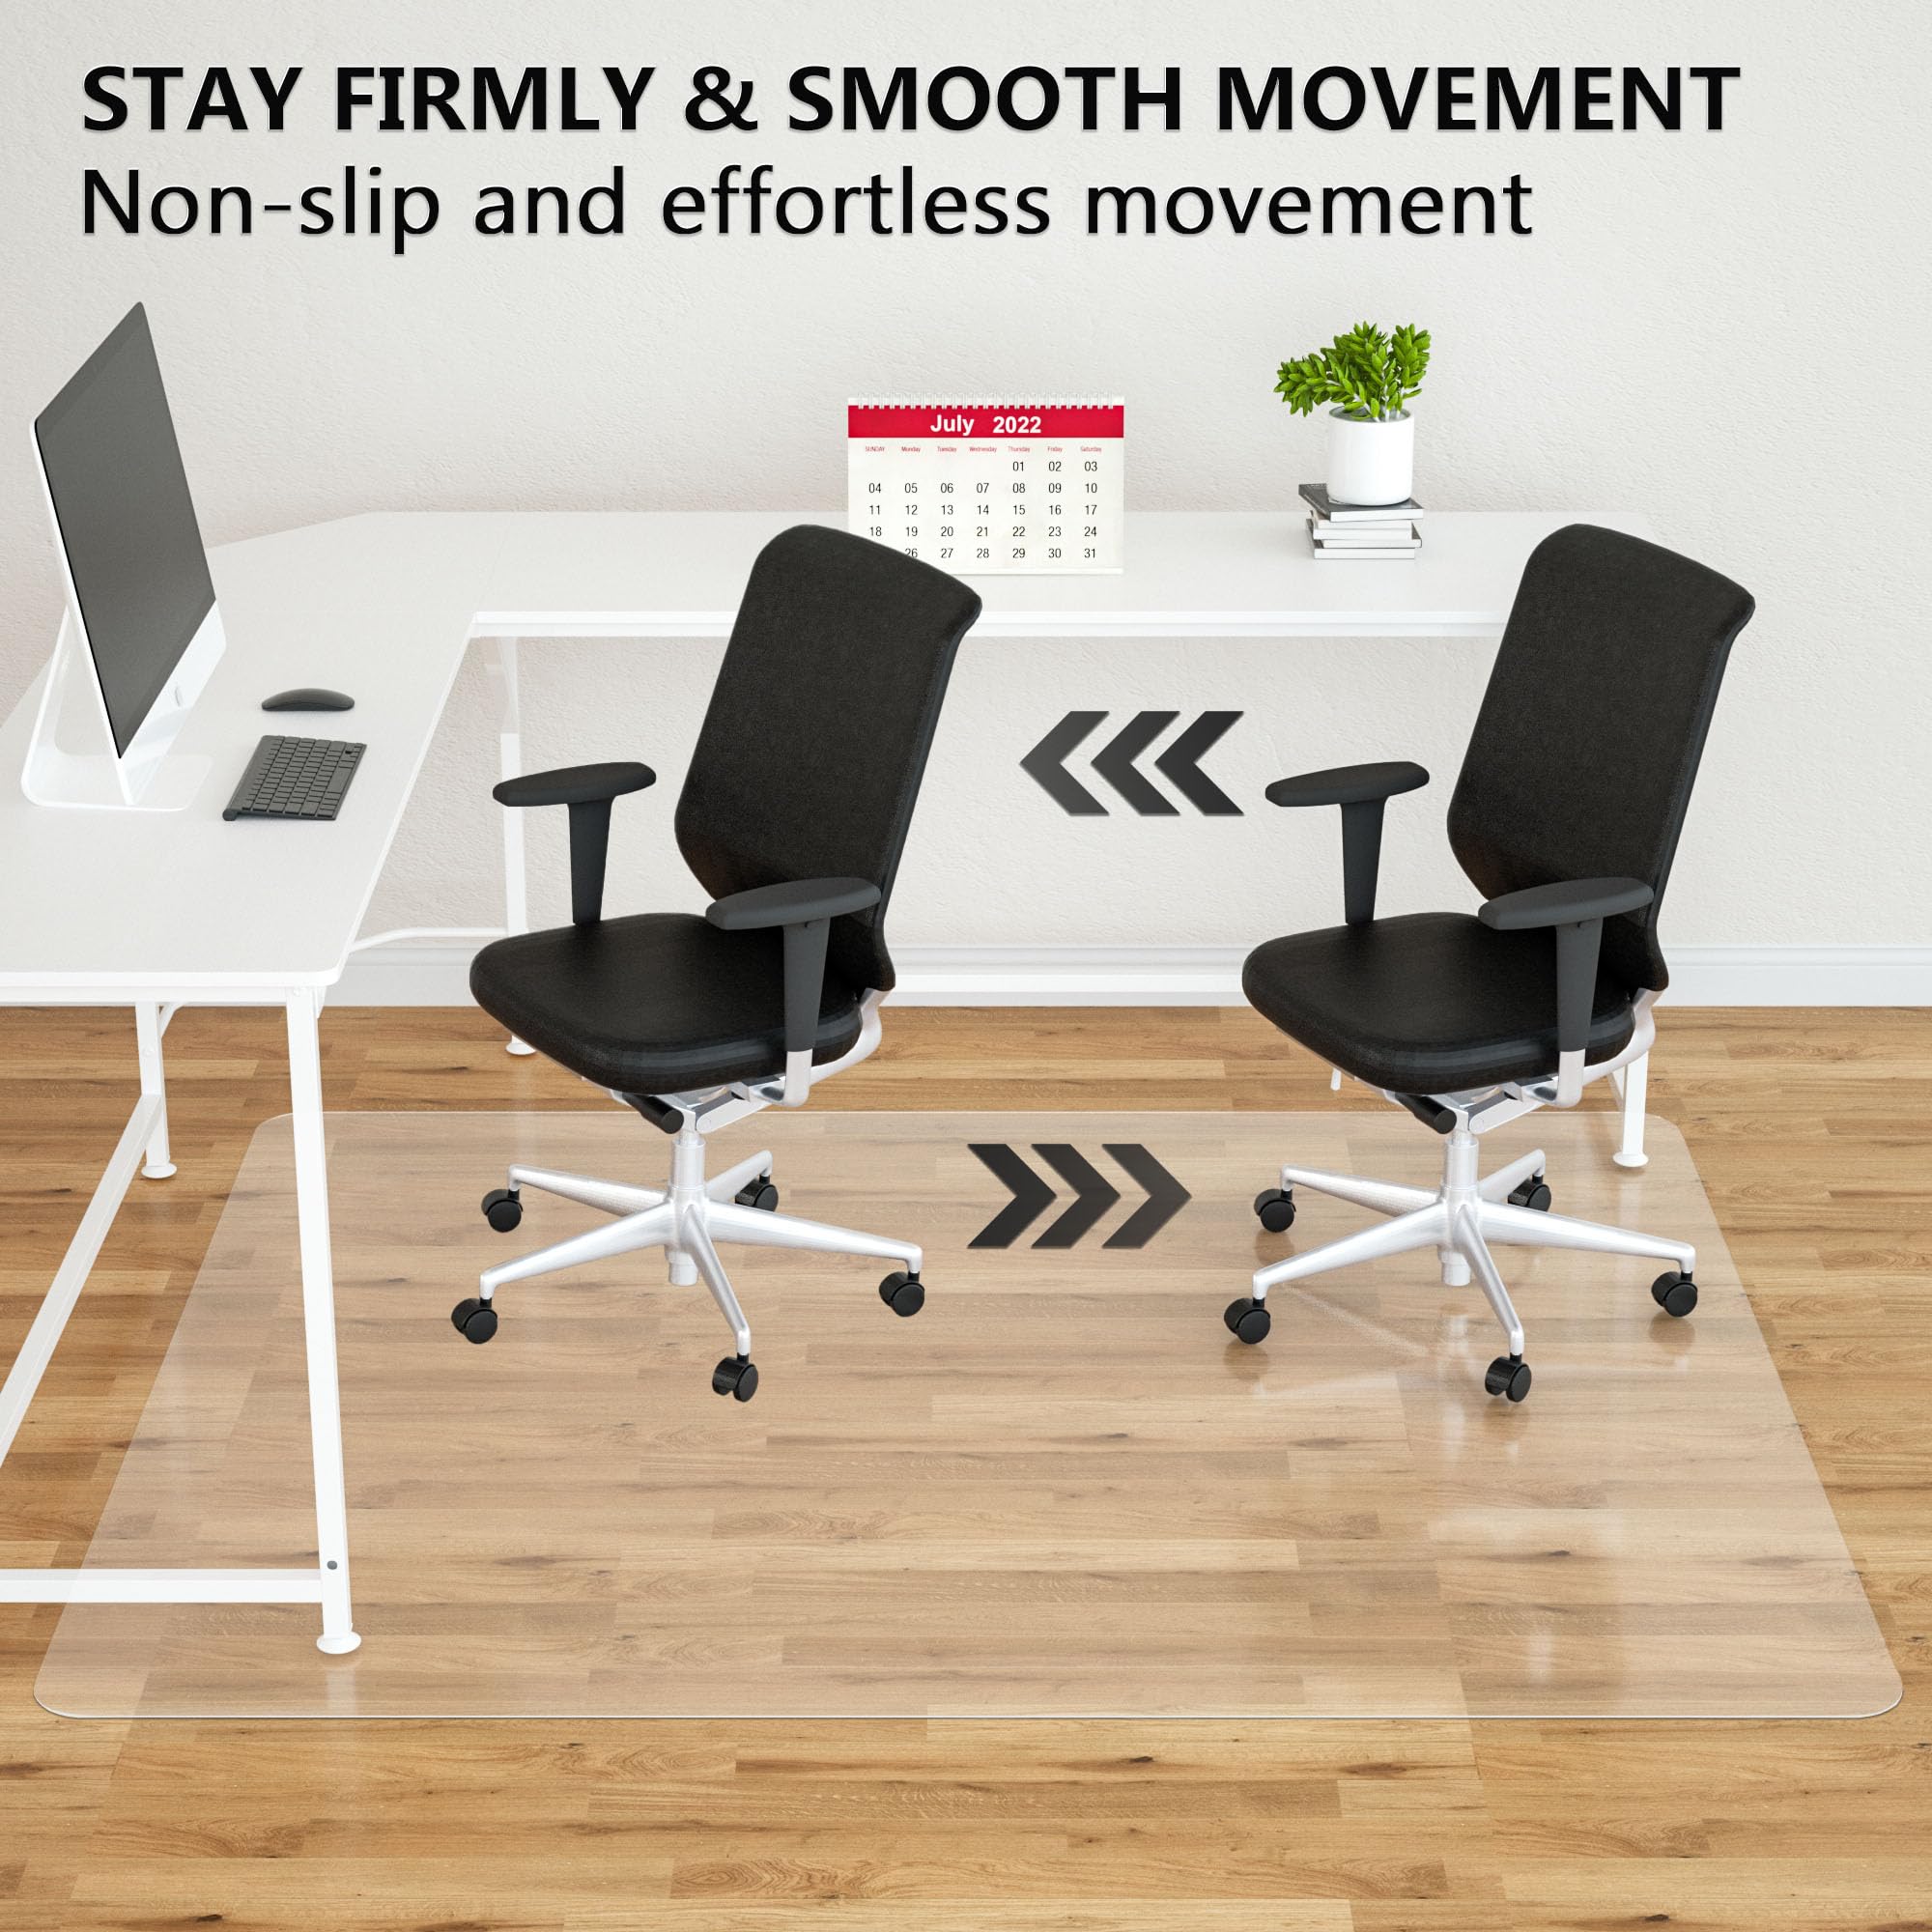 Amyracel Extra Large Office Chair Mat for Hardwood Floor- 46" x 72" Clear Computer Desk Chair Floor Mat for Hard Wood/Tile Floors, Easy Glide Floor Protector Mat for Rolling Chairs at Home or Work